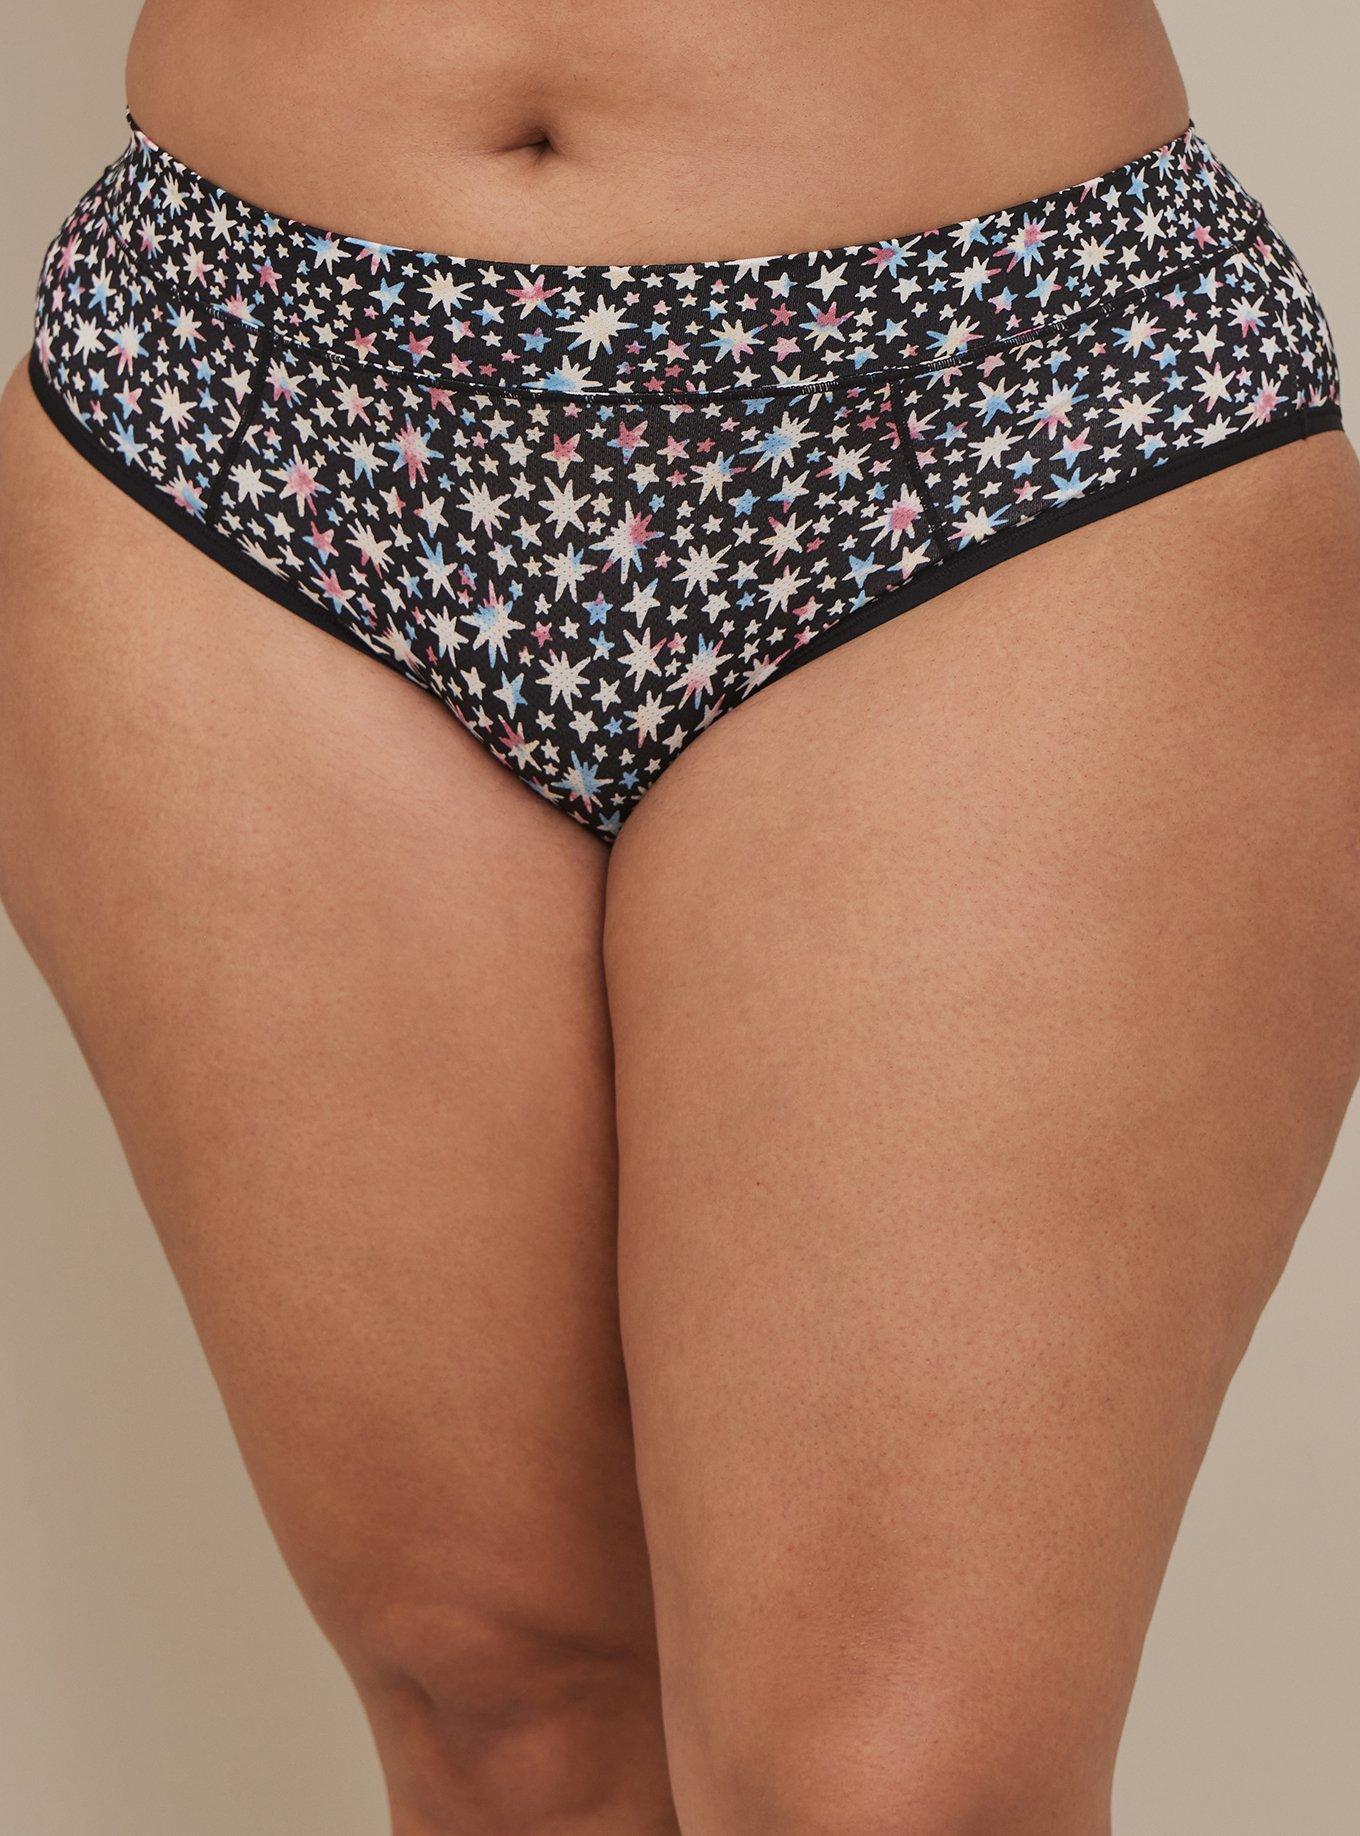 NWT Torrid Plus Size 1X 14/16 MICROFIBER MID-RISE HIPSTER PANTY